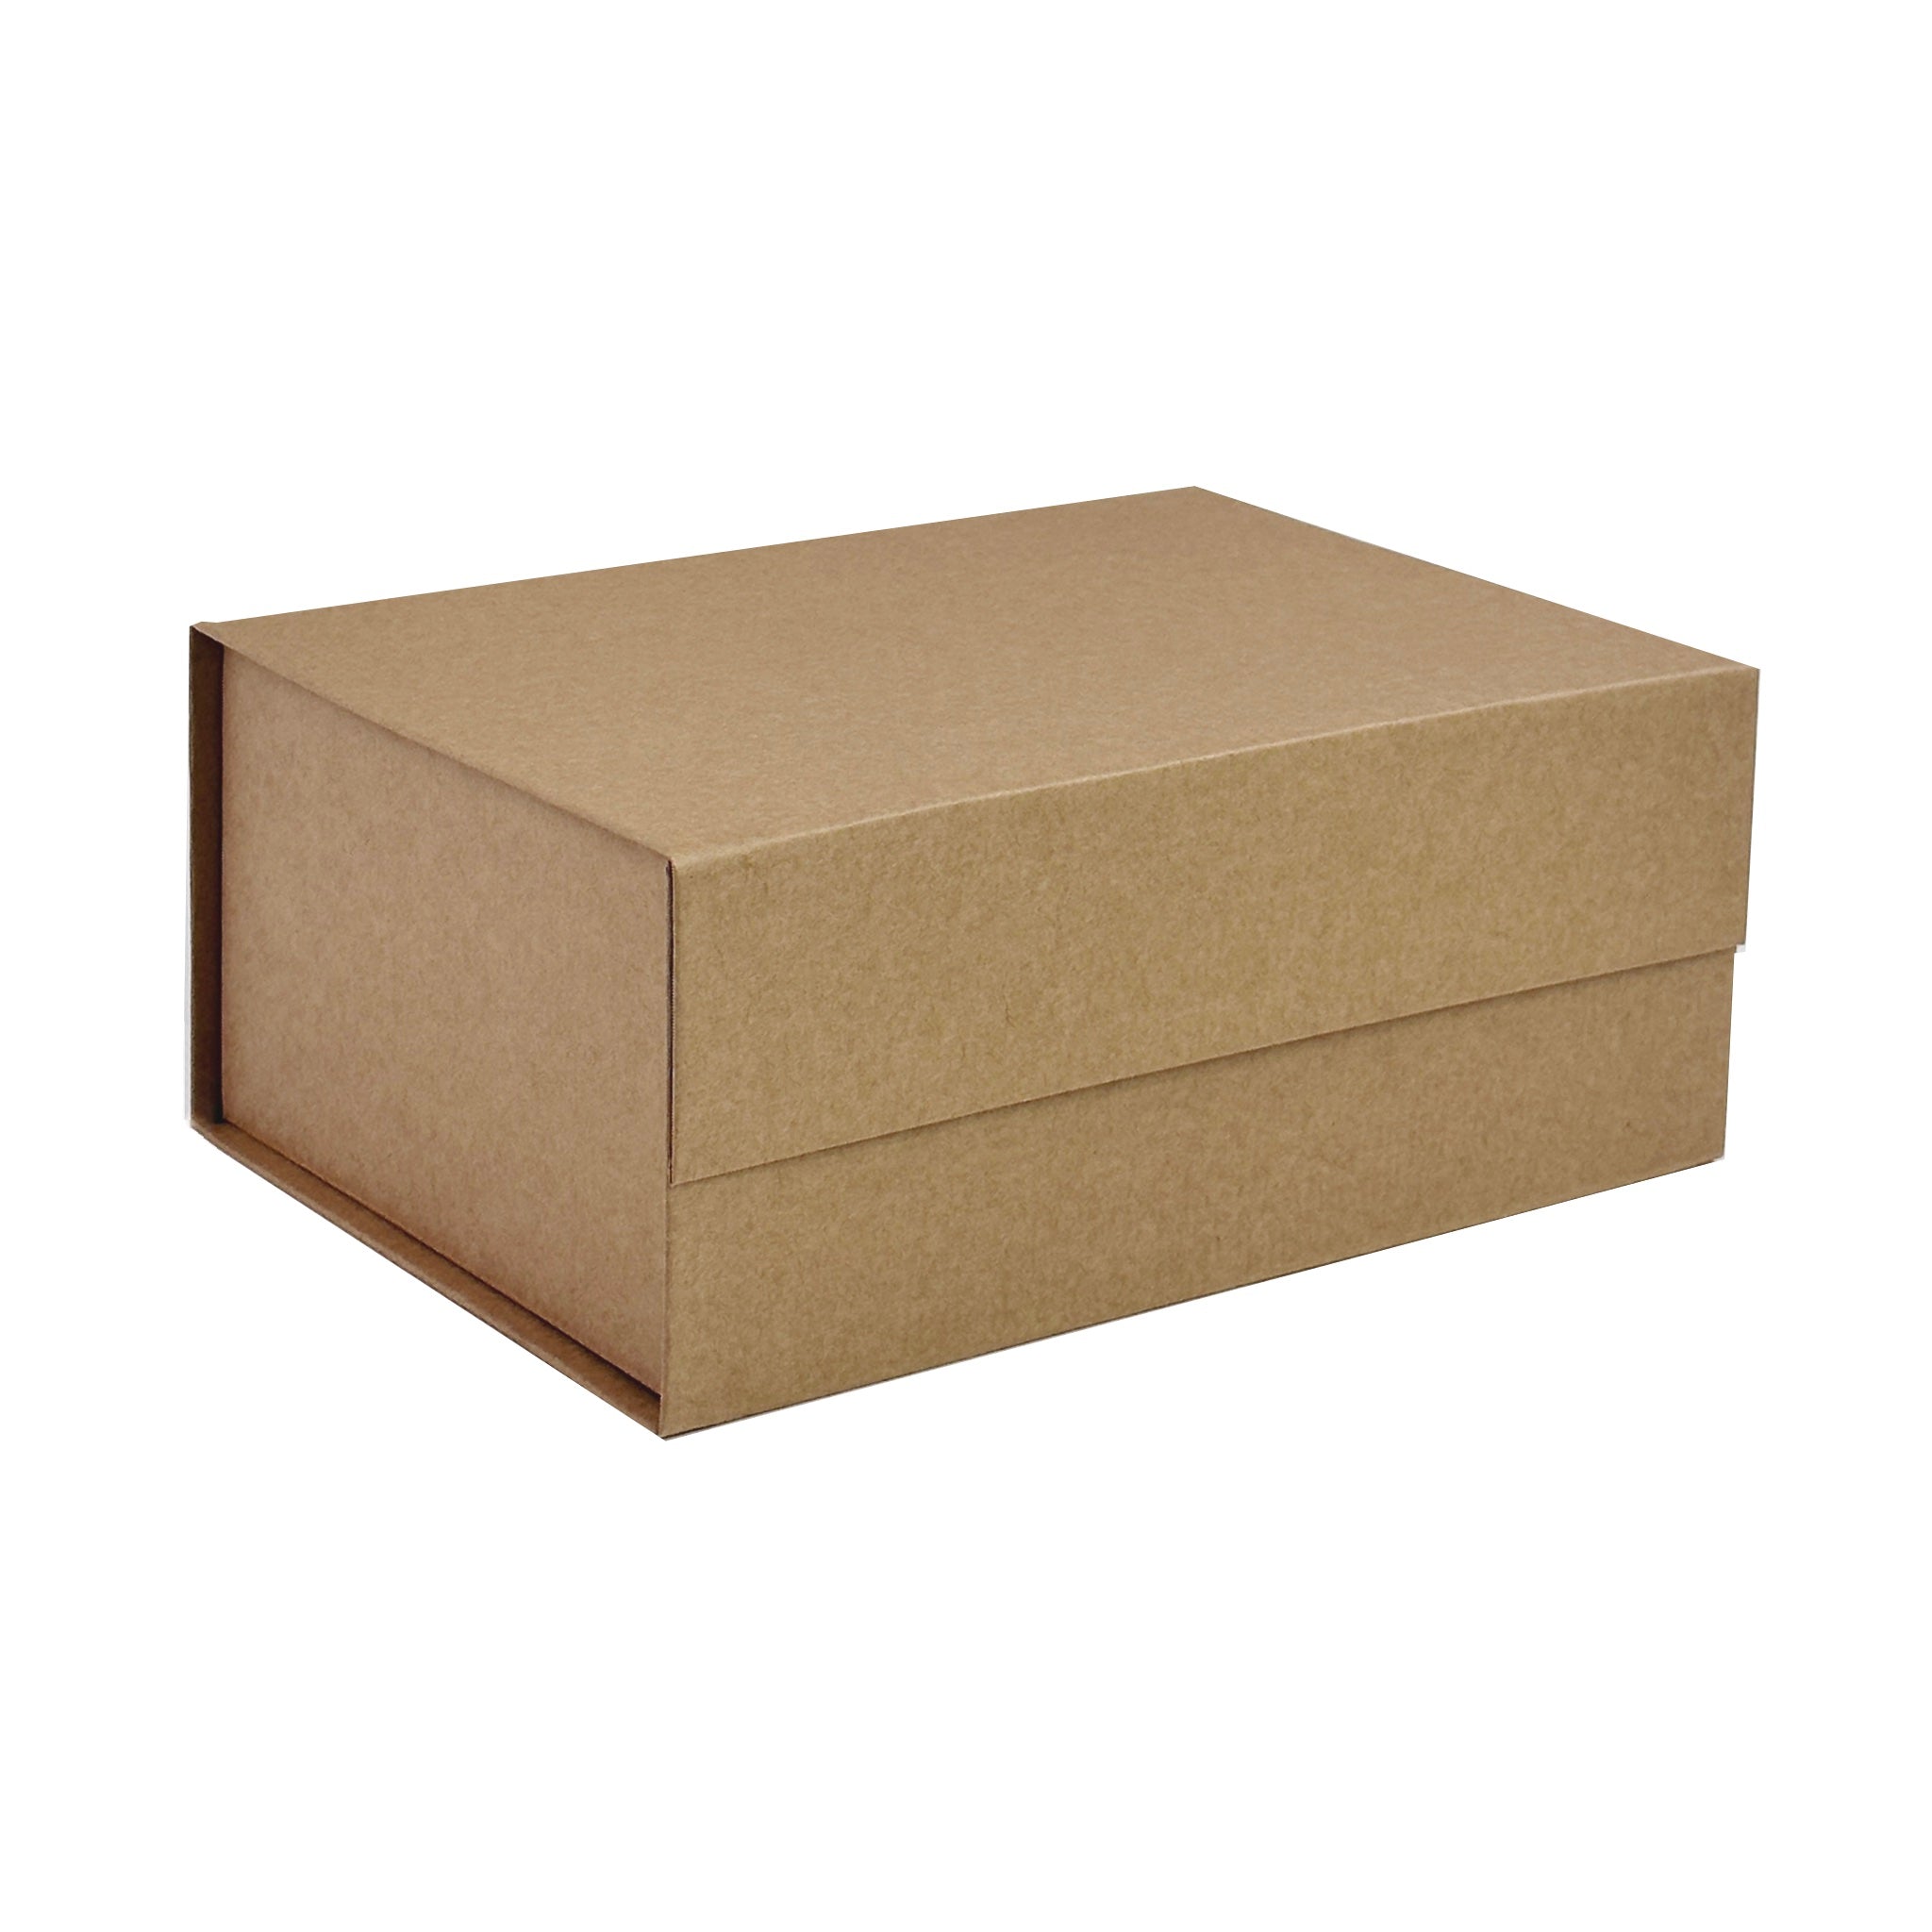 Black Large Gift Boxes with fixed ribbon